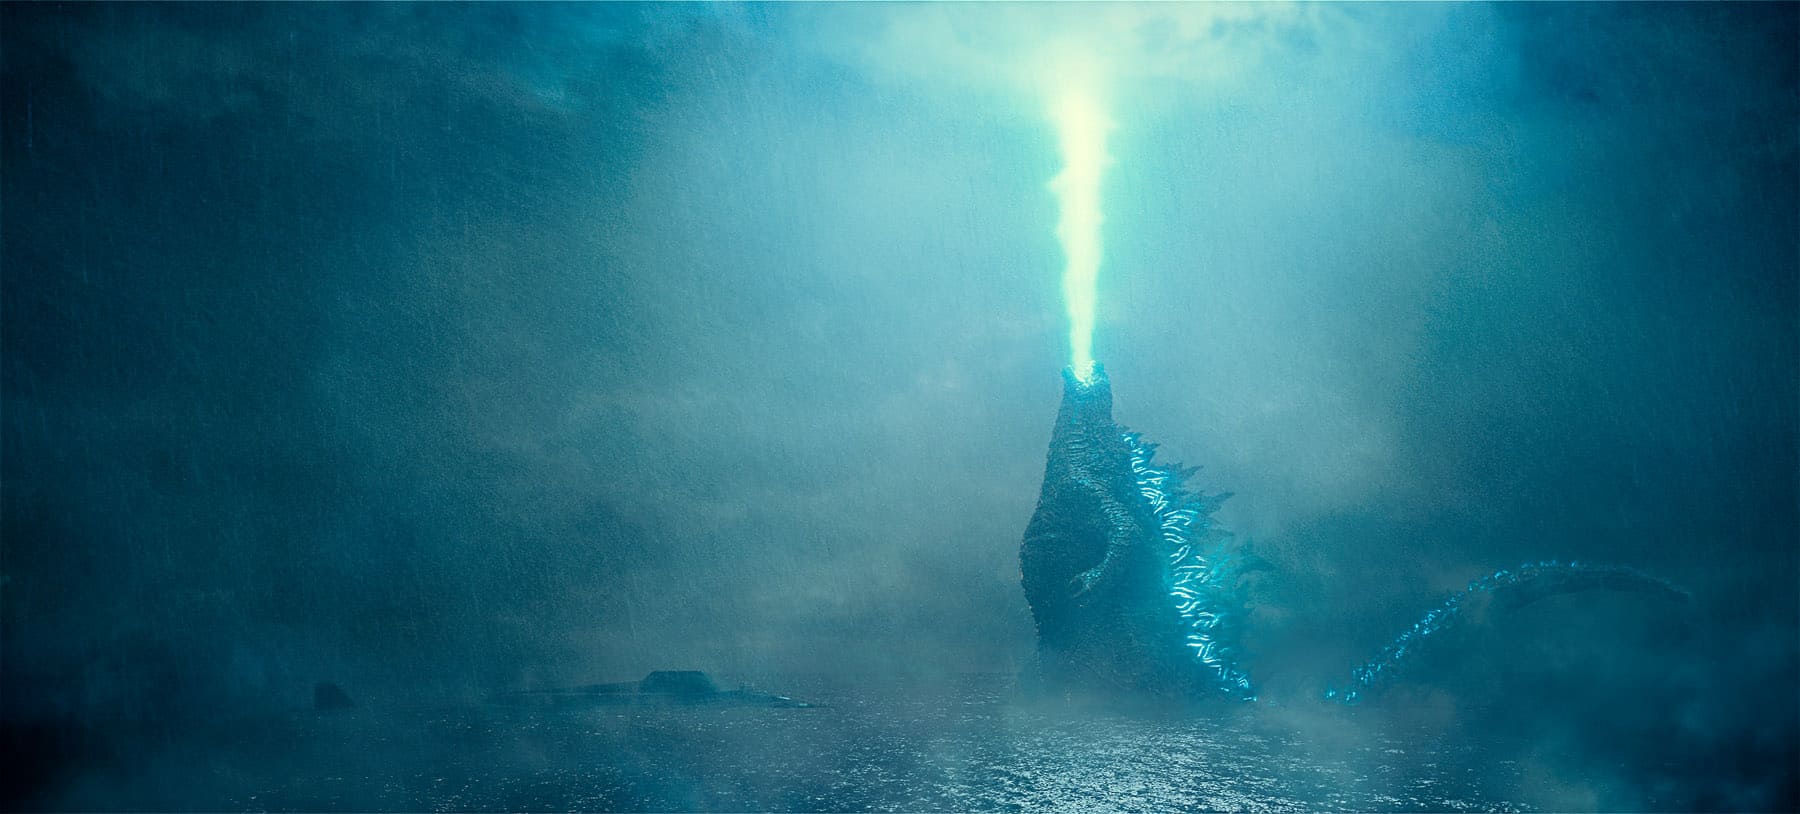 Godzilla King of the Monsters trailer